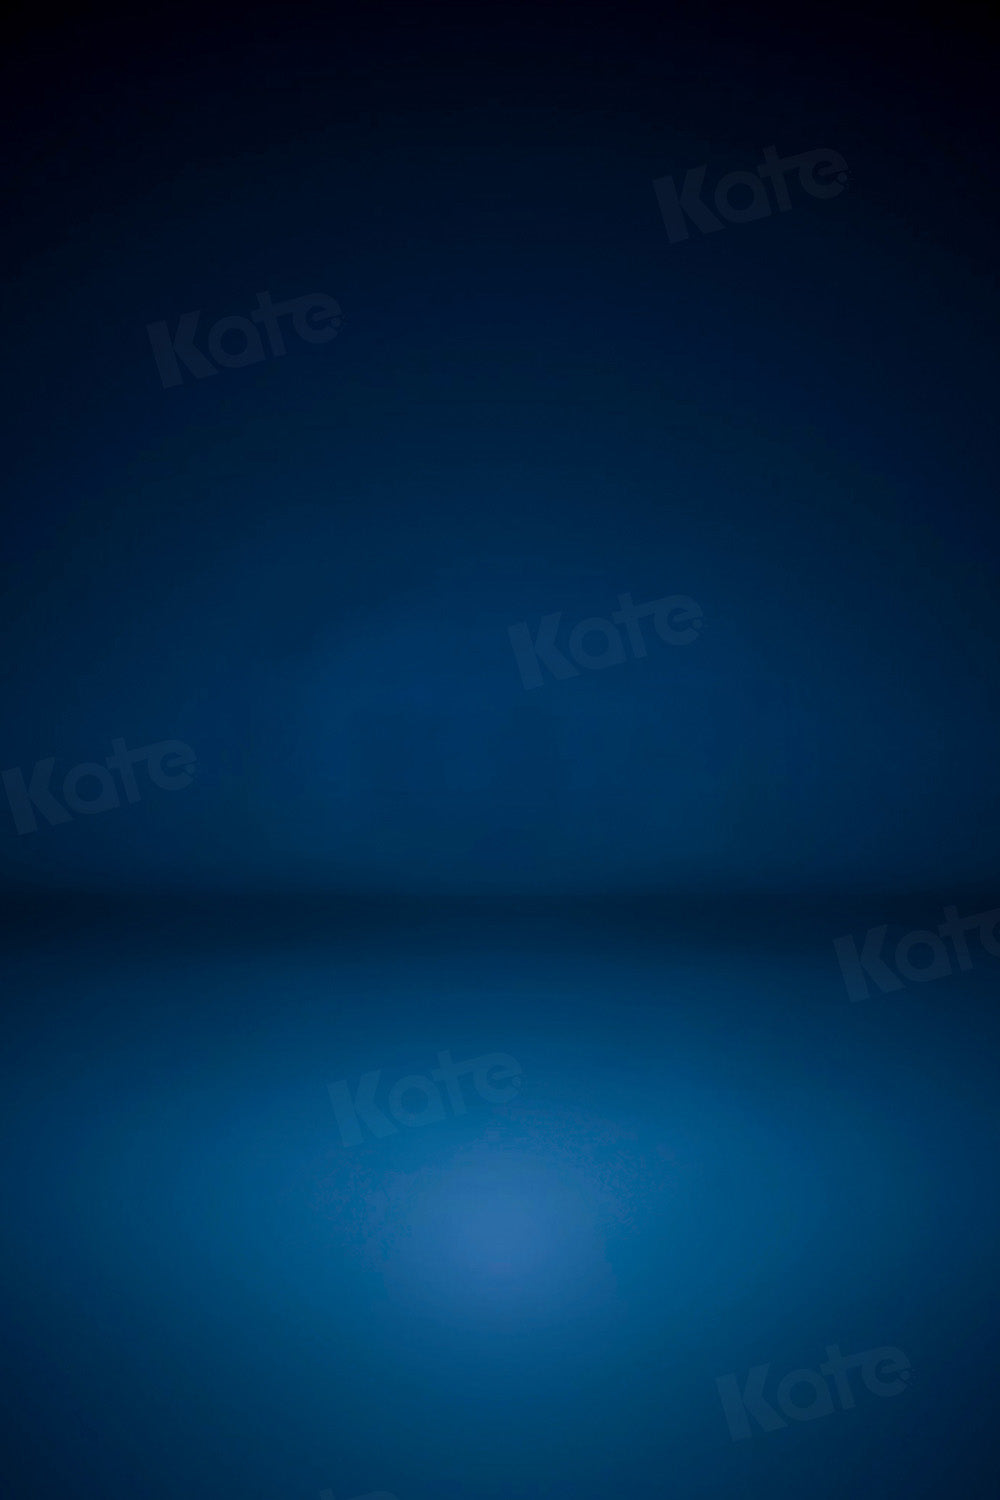 Kate Abstract Blue Backdrop Fine Art Designed by Kate Image